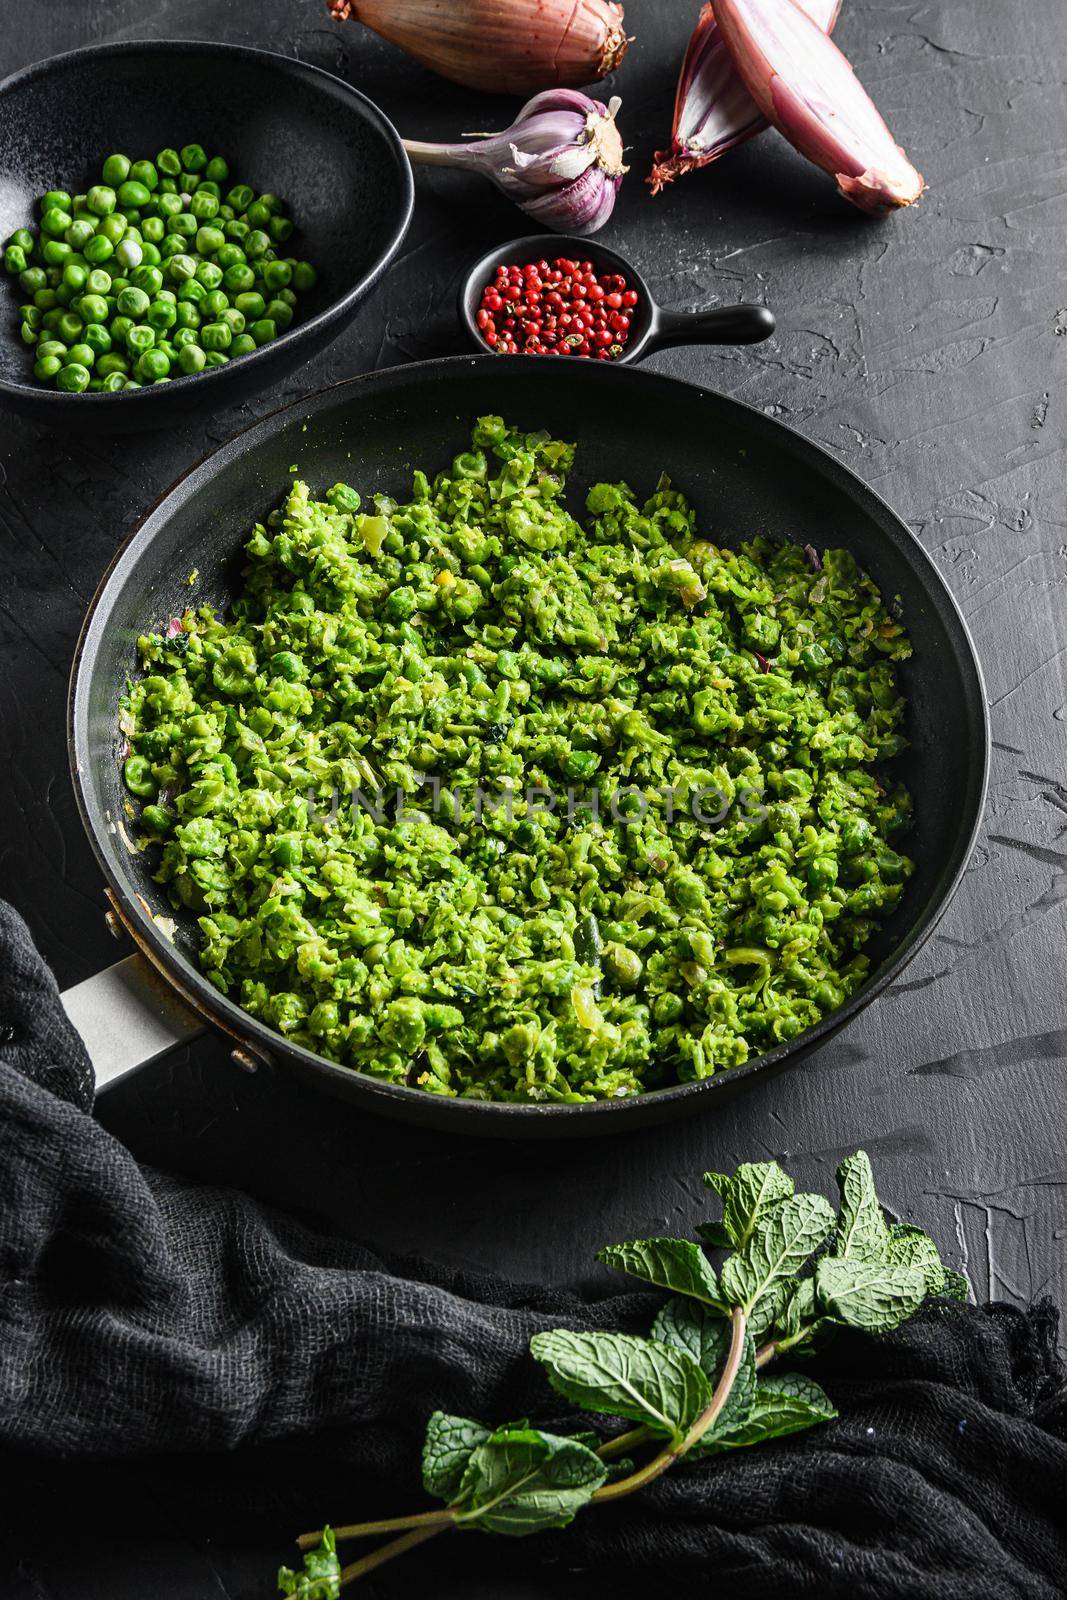 english mushy peas recipe cooked frying pan and peas in bowl with mint shallot pepper and salt over black stone surface organic keto food side view.